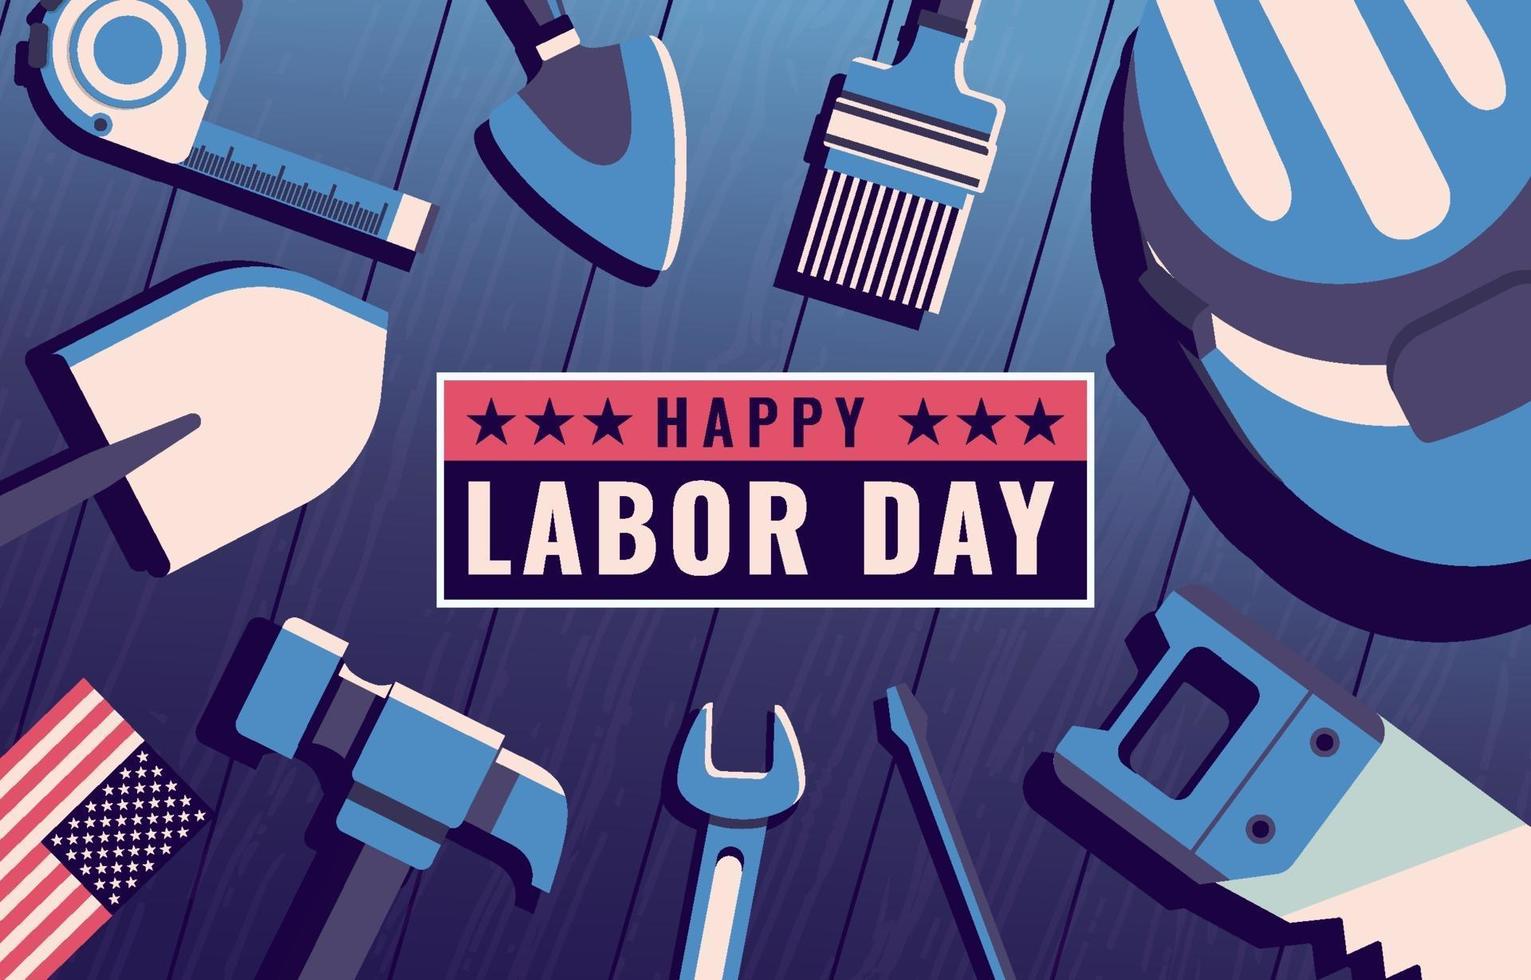 Happy Labor Day with Construction Tools vector